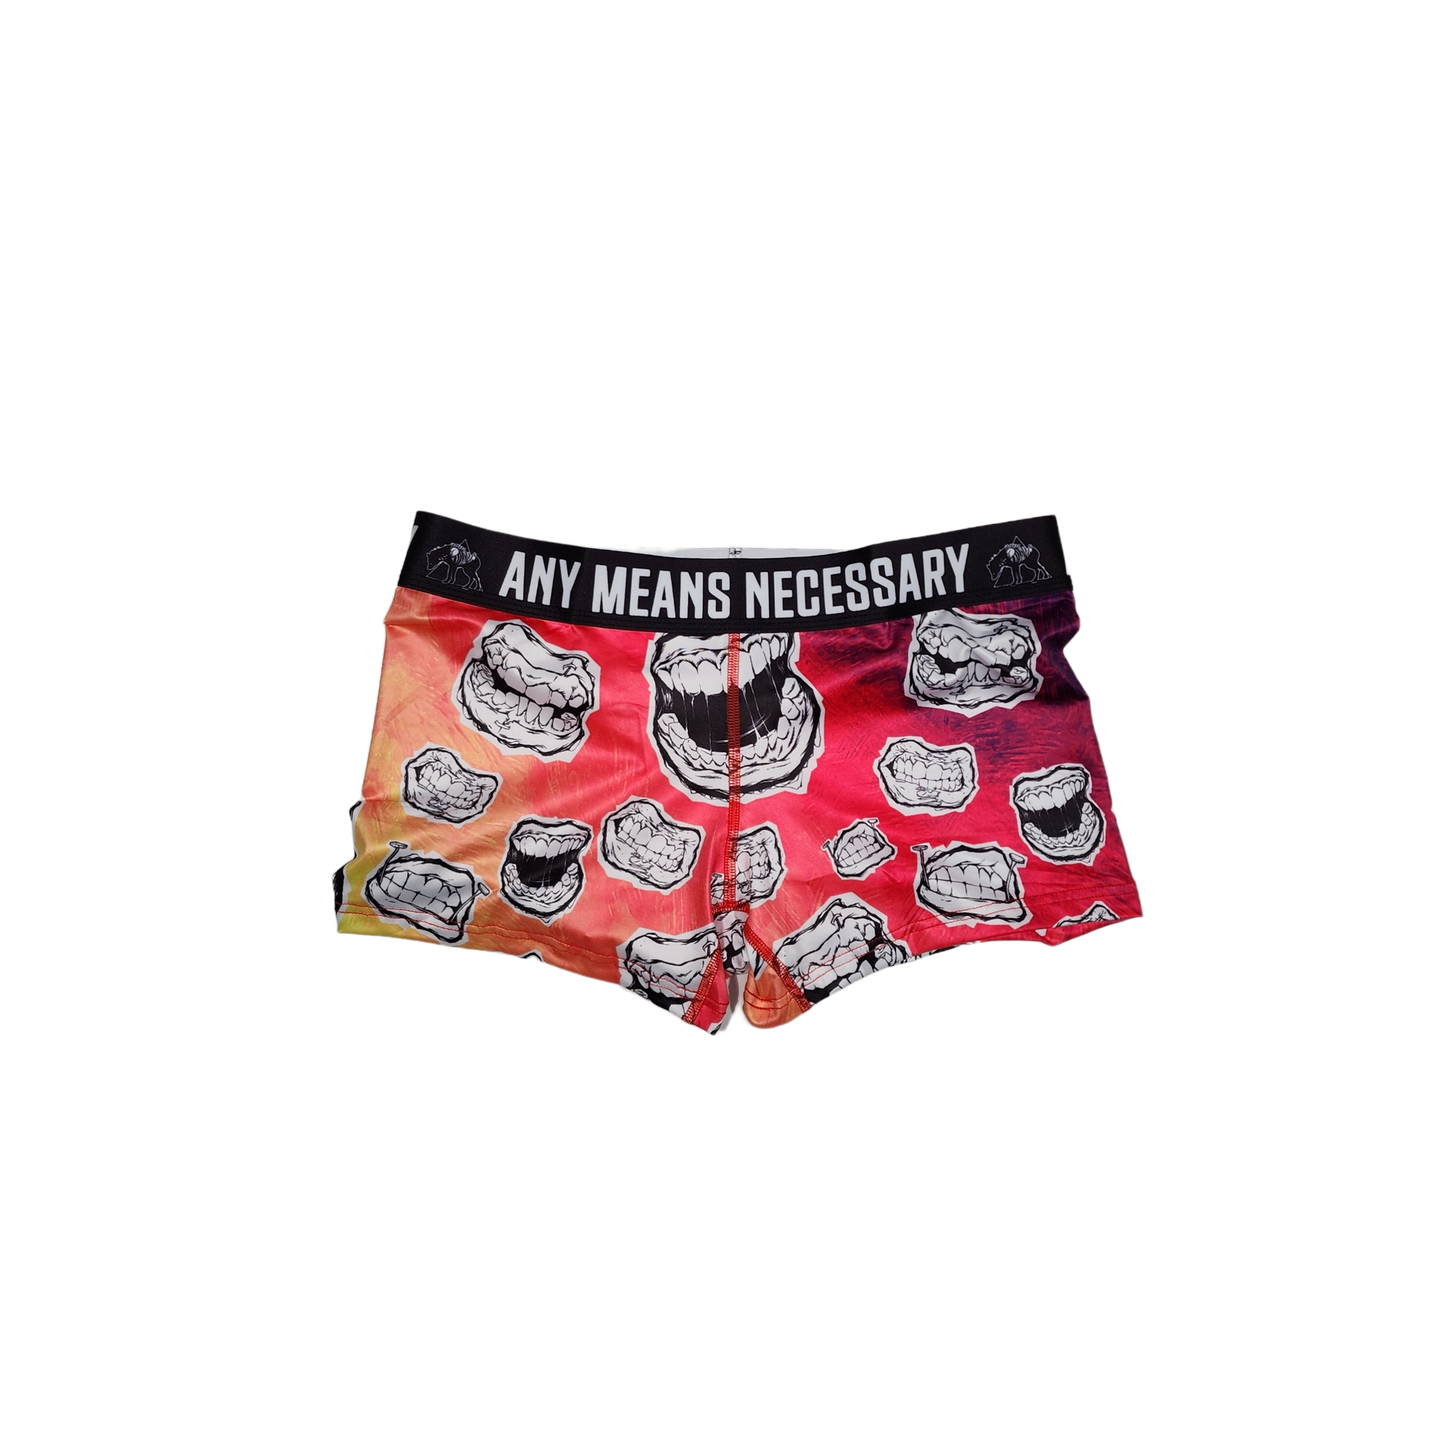 any means necessary shawn coss smile through the pain women's underwear boxers pink tie dye